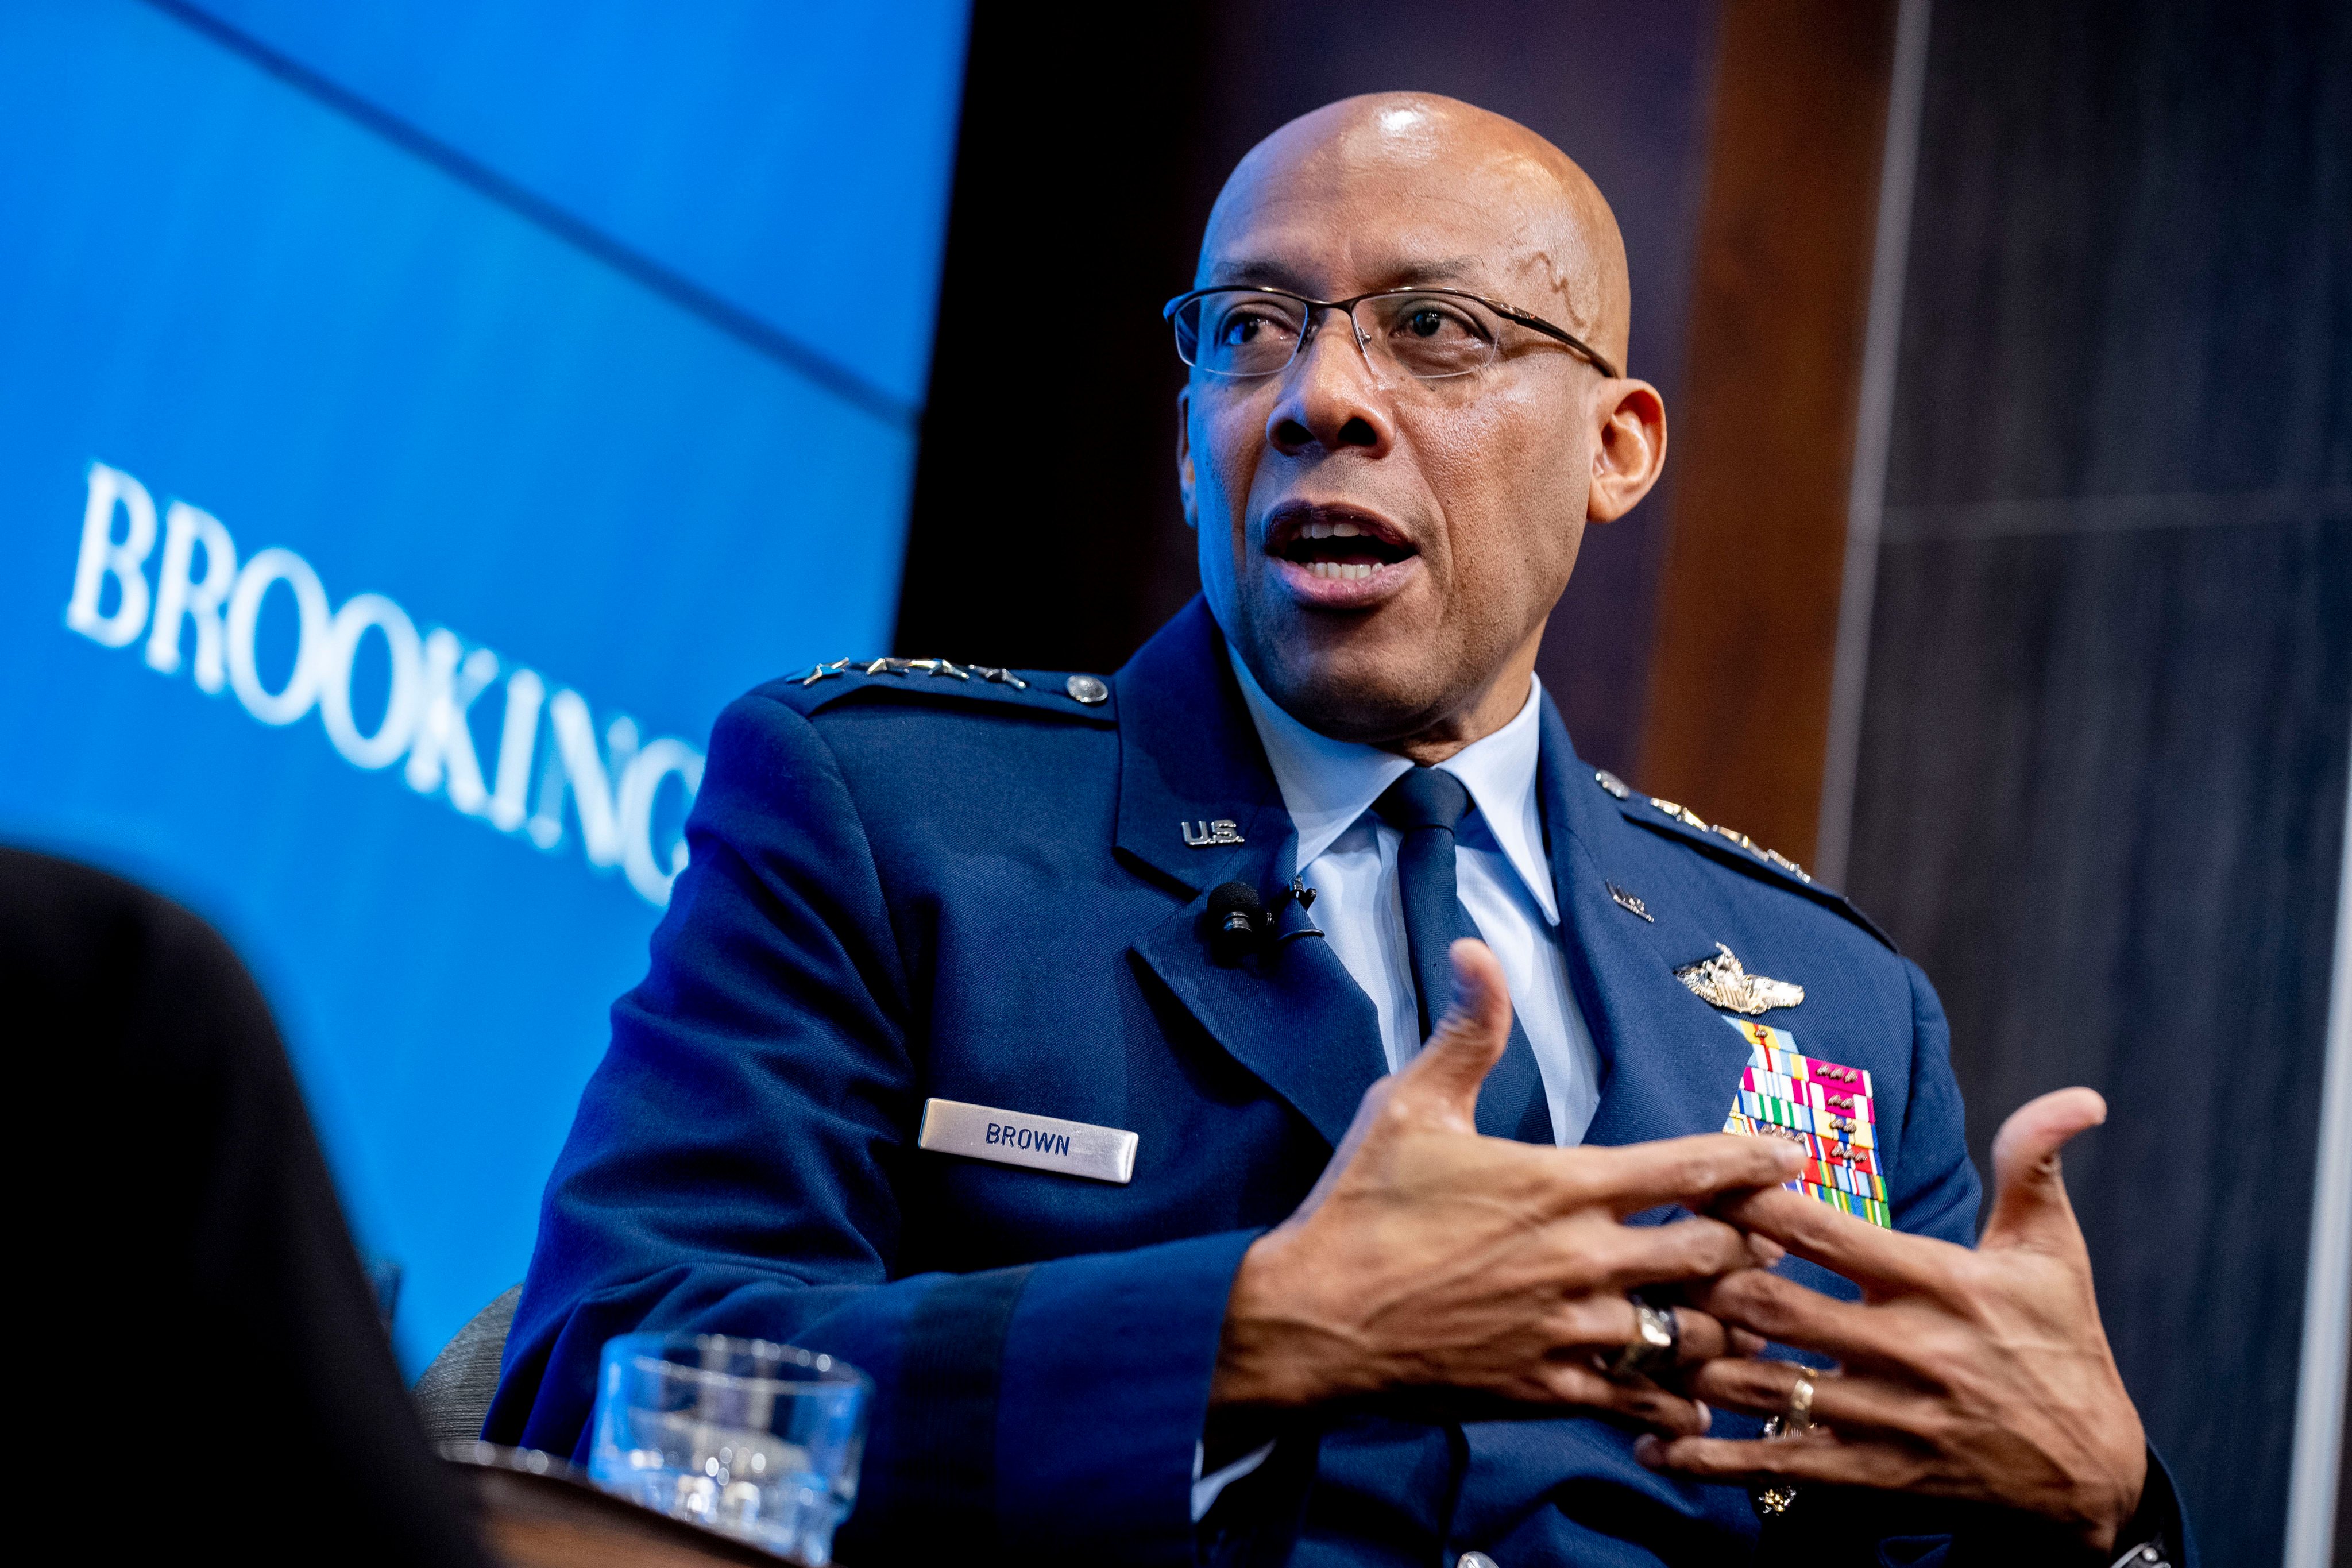 Air Force Chief of Staff General CQ Brown spoke with China’s General Liu Zhenli is the first senior military communications between the US and China since August 2022. Photo: AP